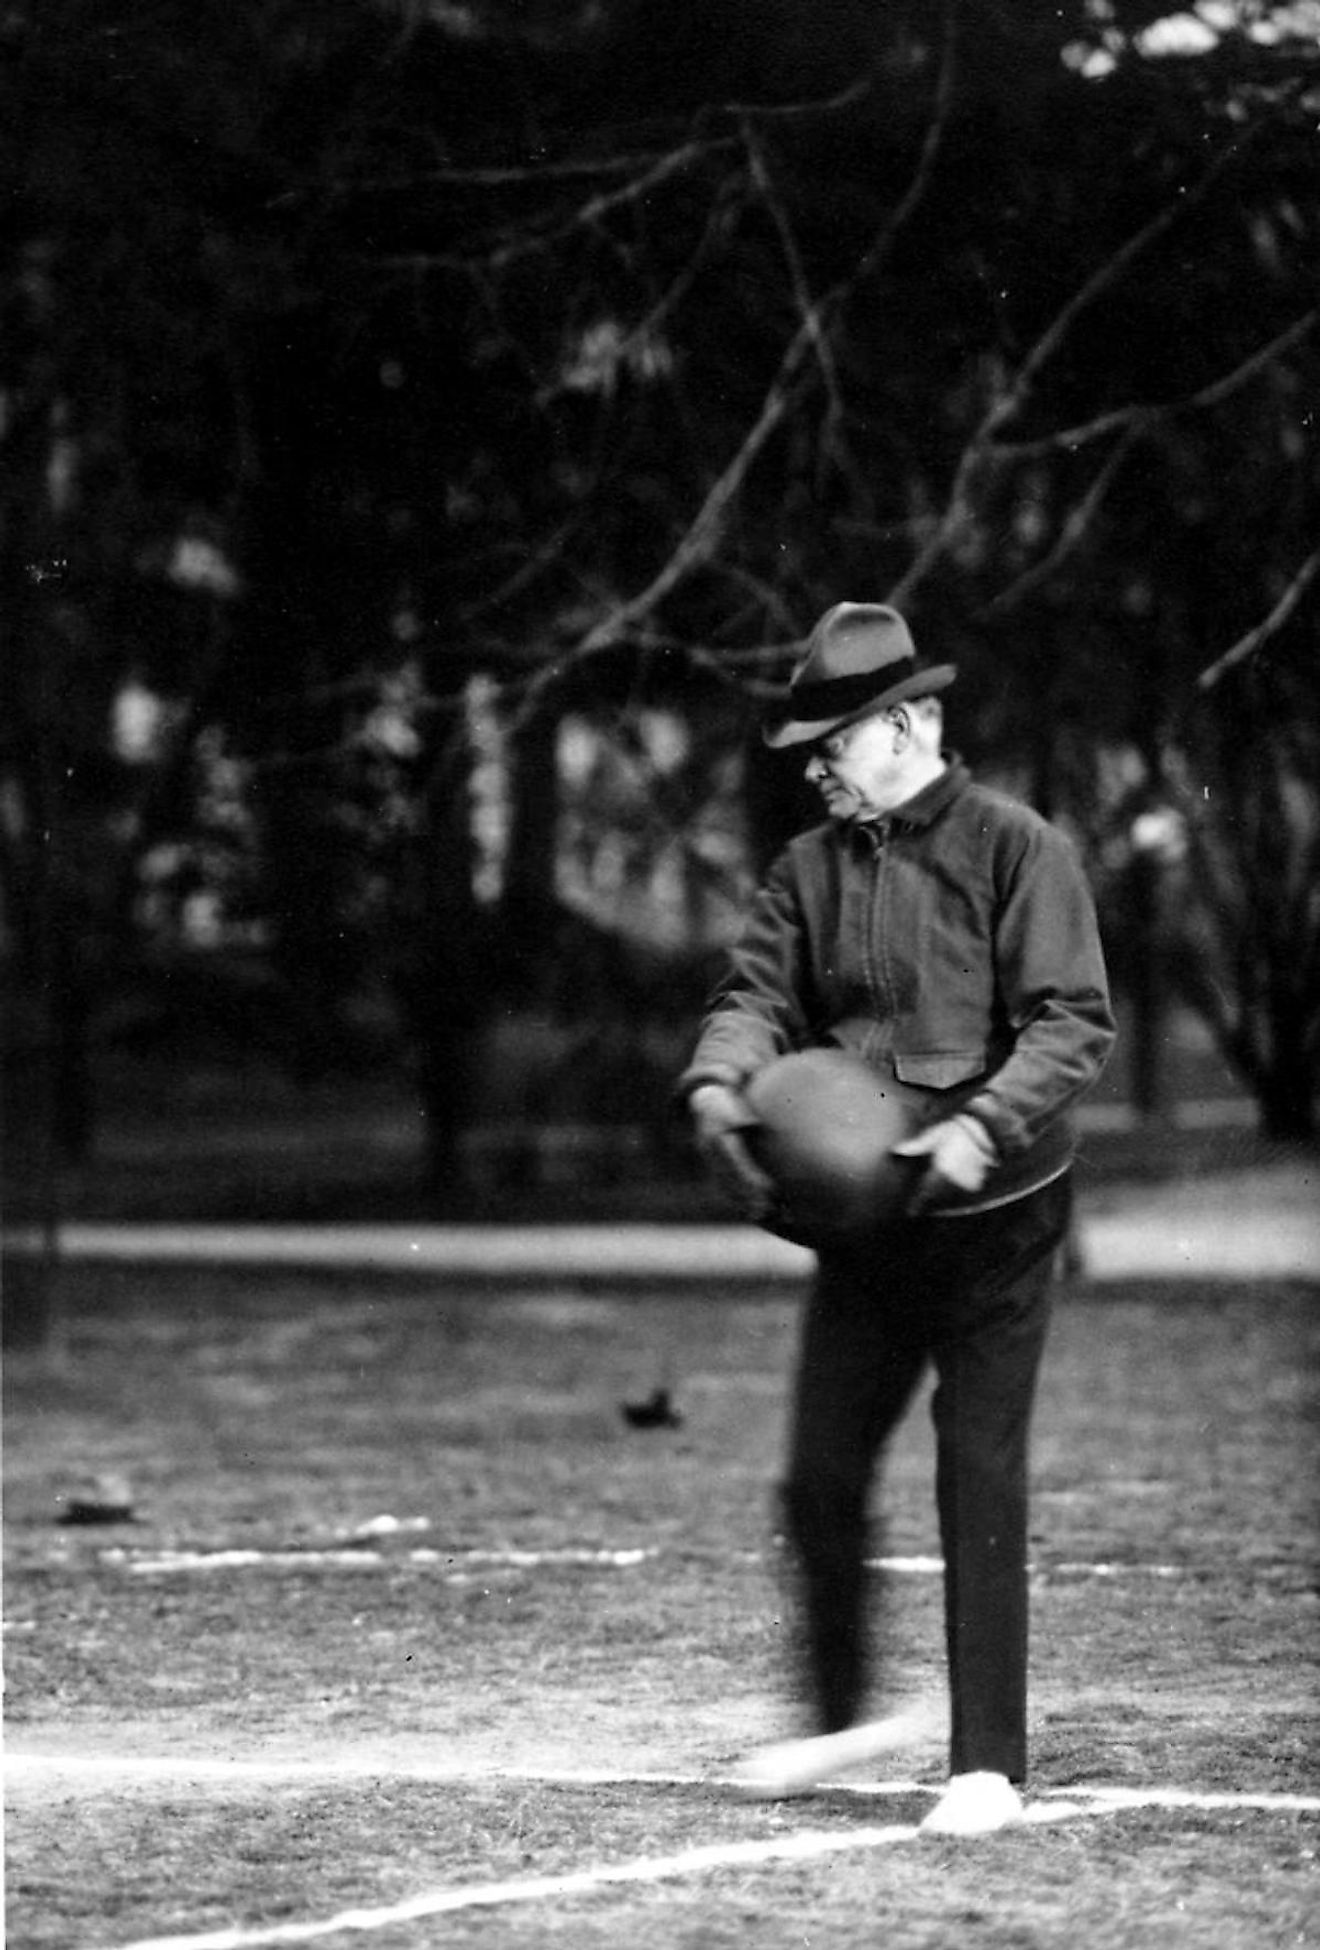 President Hoover playing Hoover-Ball on the White House lawn. Image credit: hoover.archives.gov